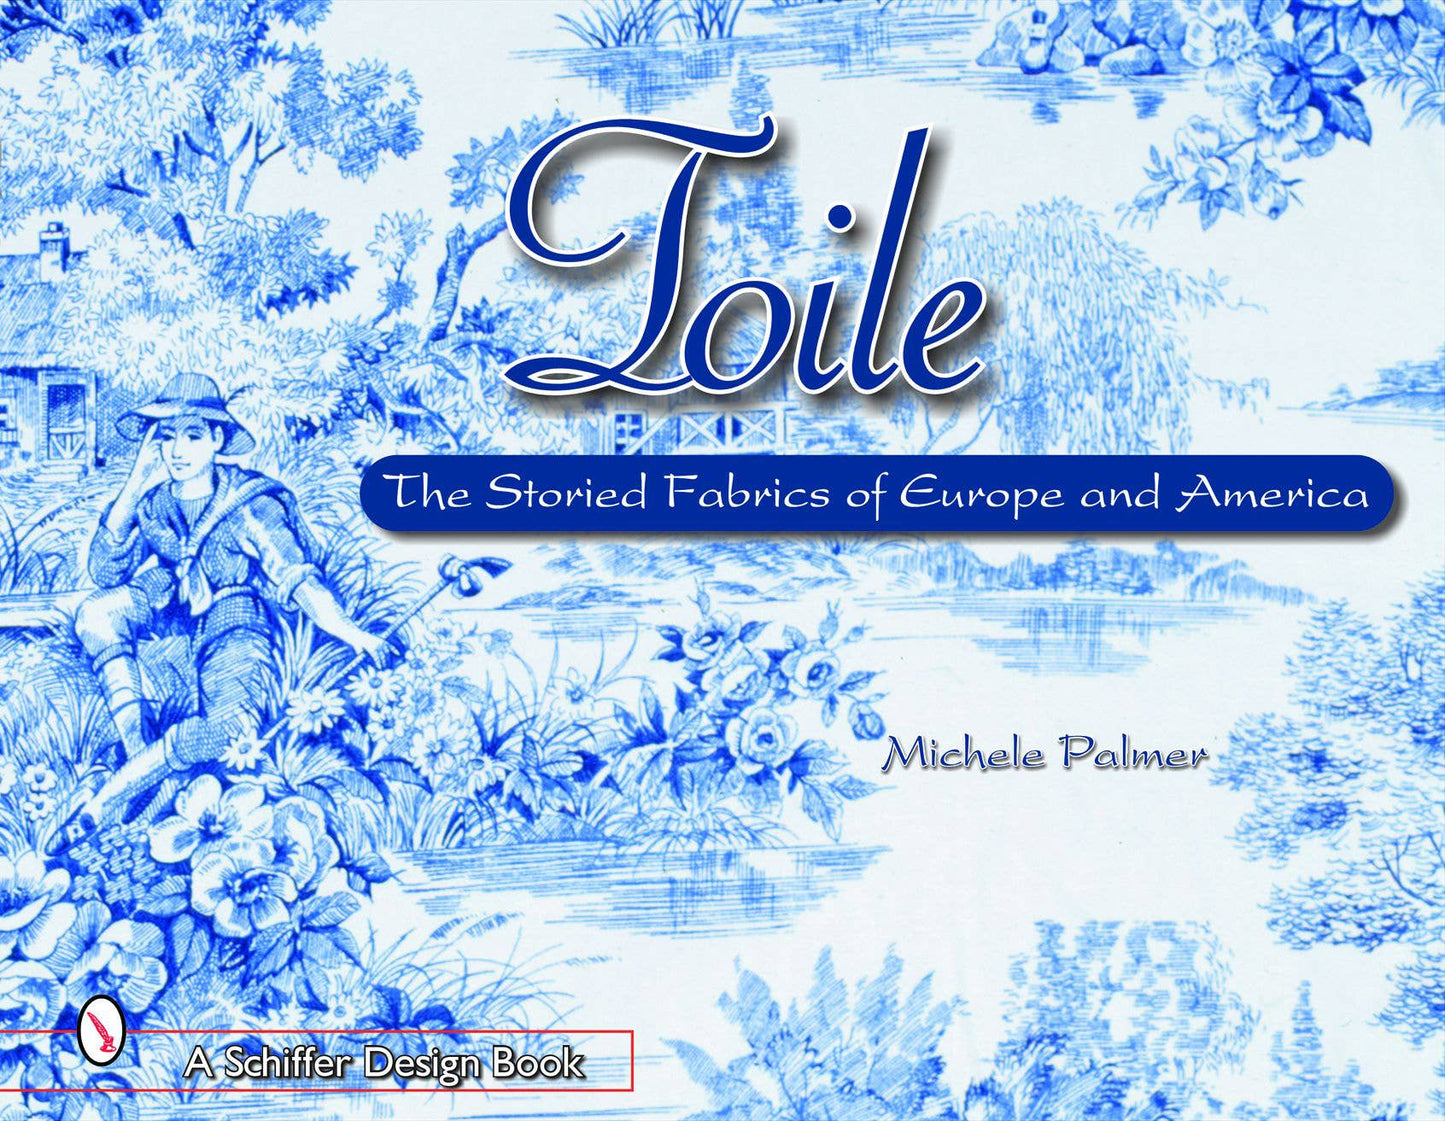 Toile: The Storied Fabrics of Europe and America